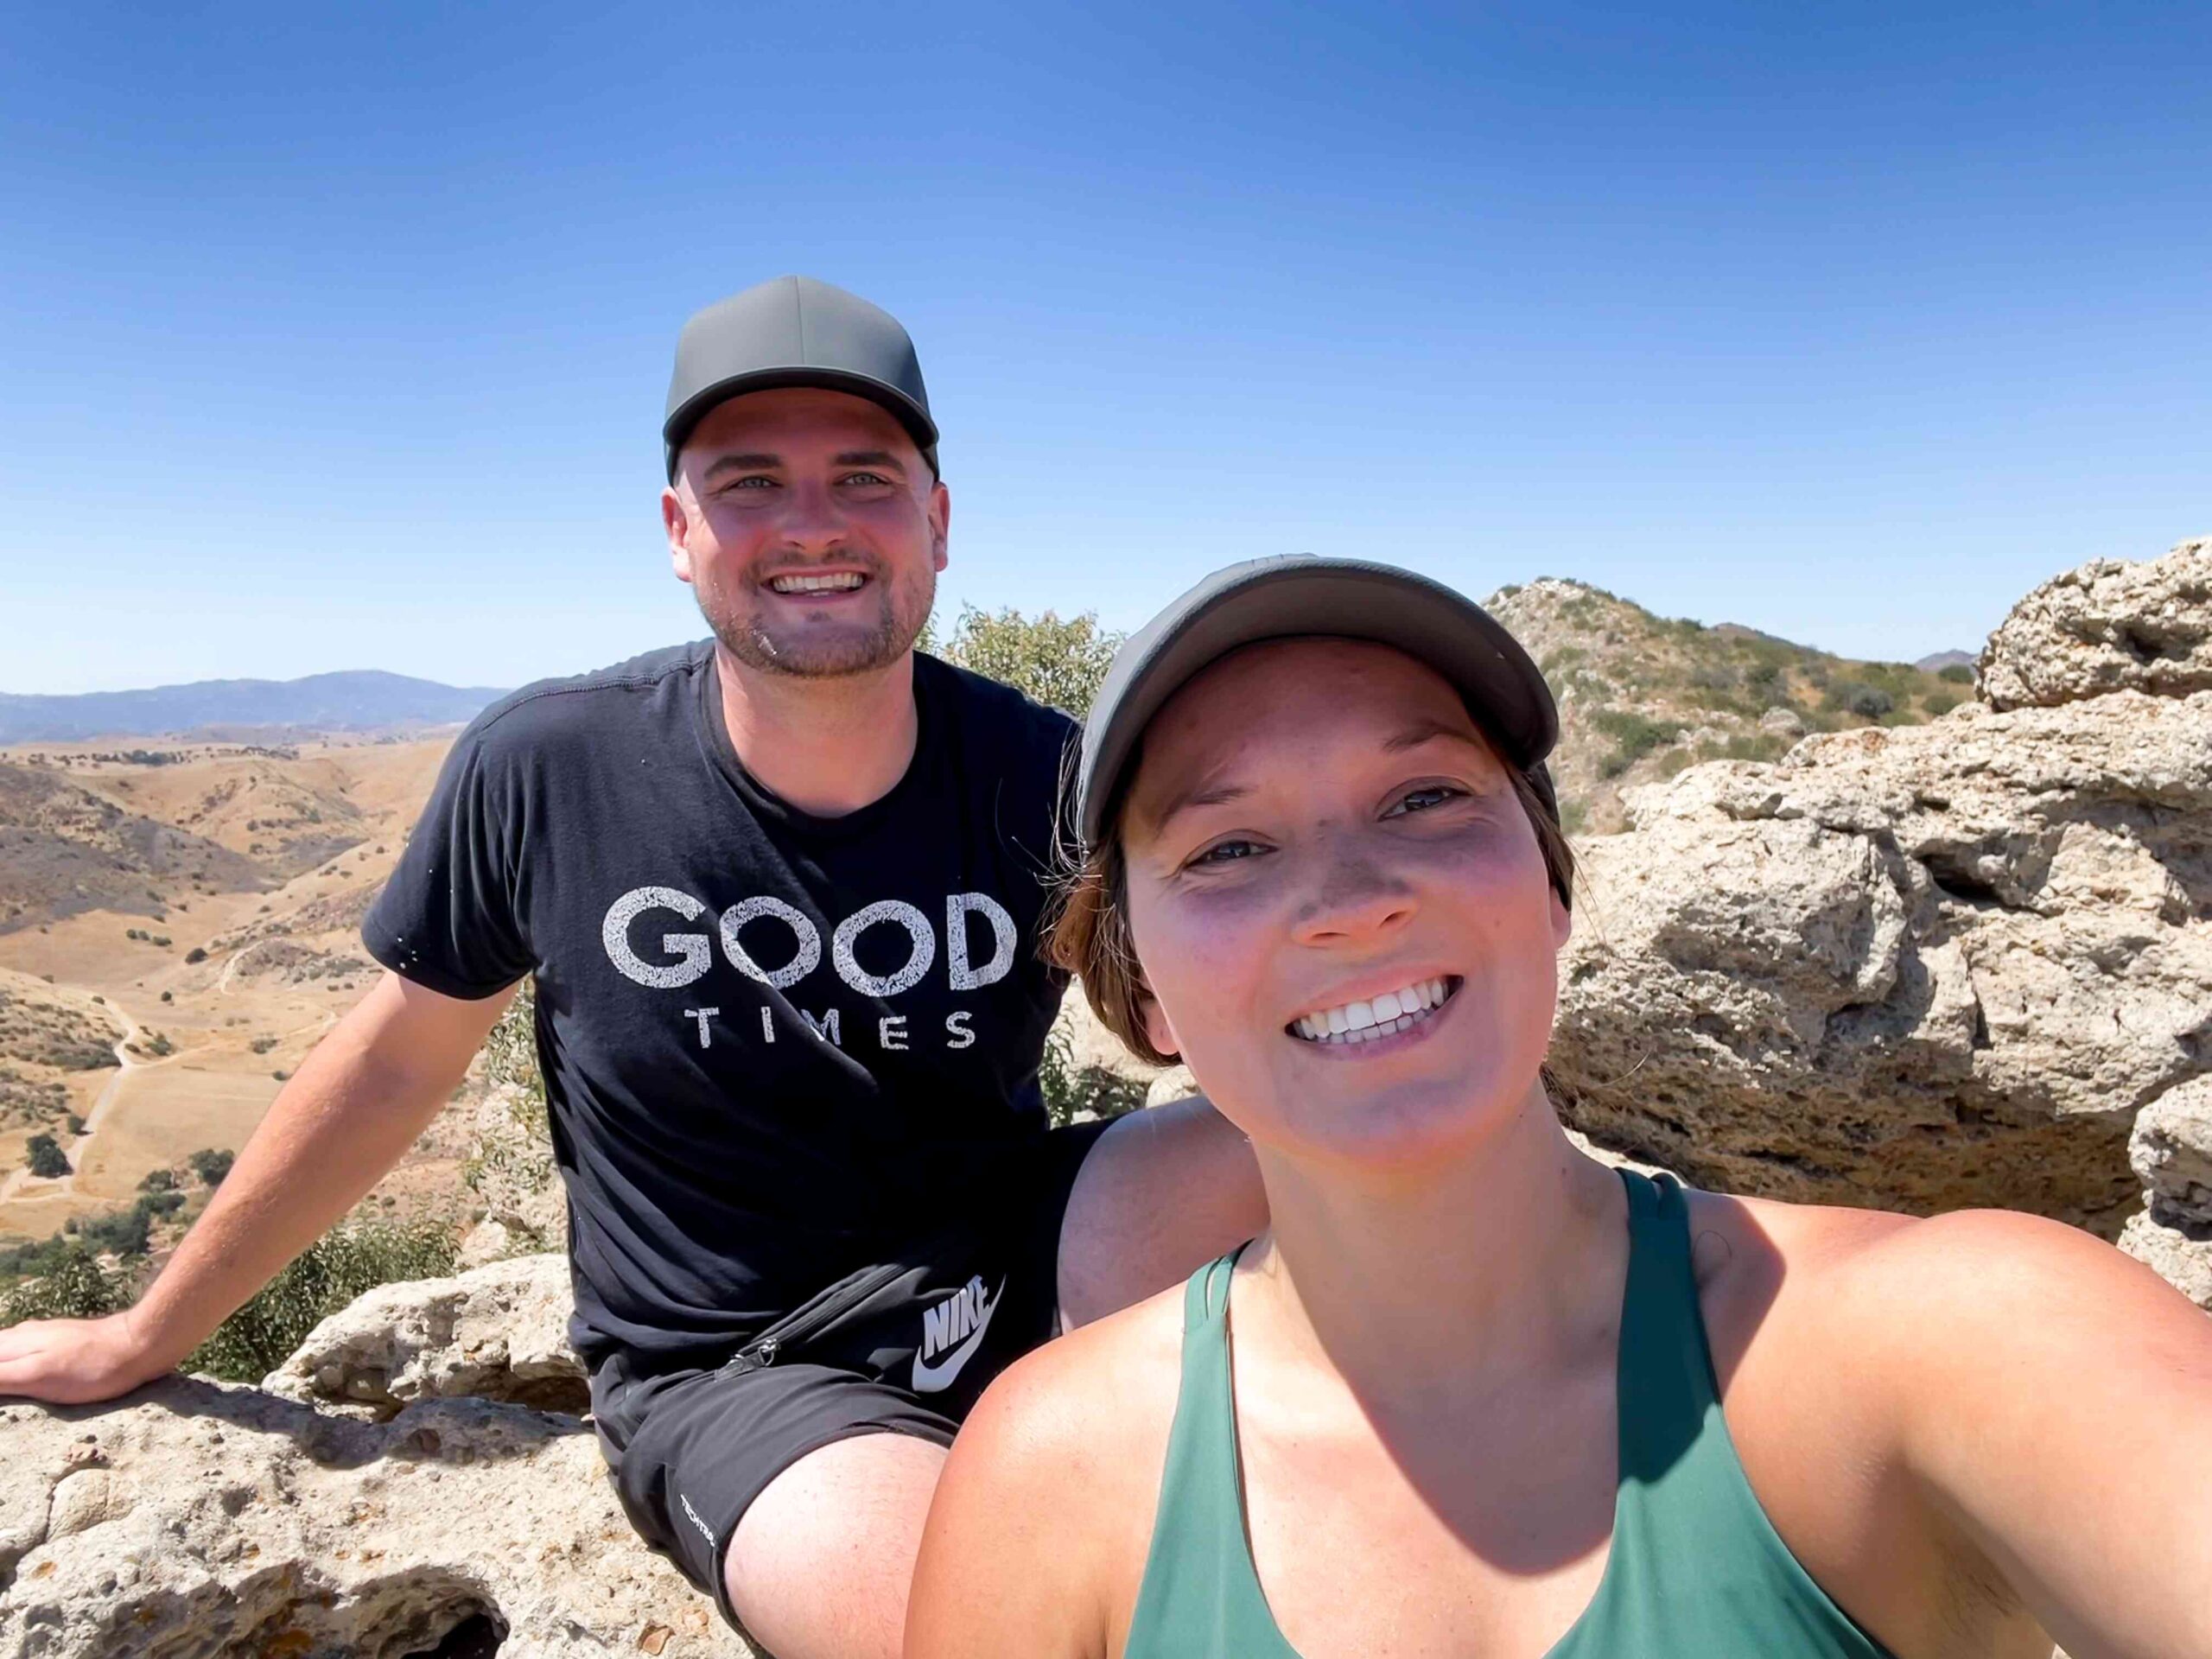 Man and Woman Hiking on a Date in Los Angeles